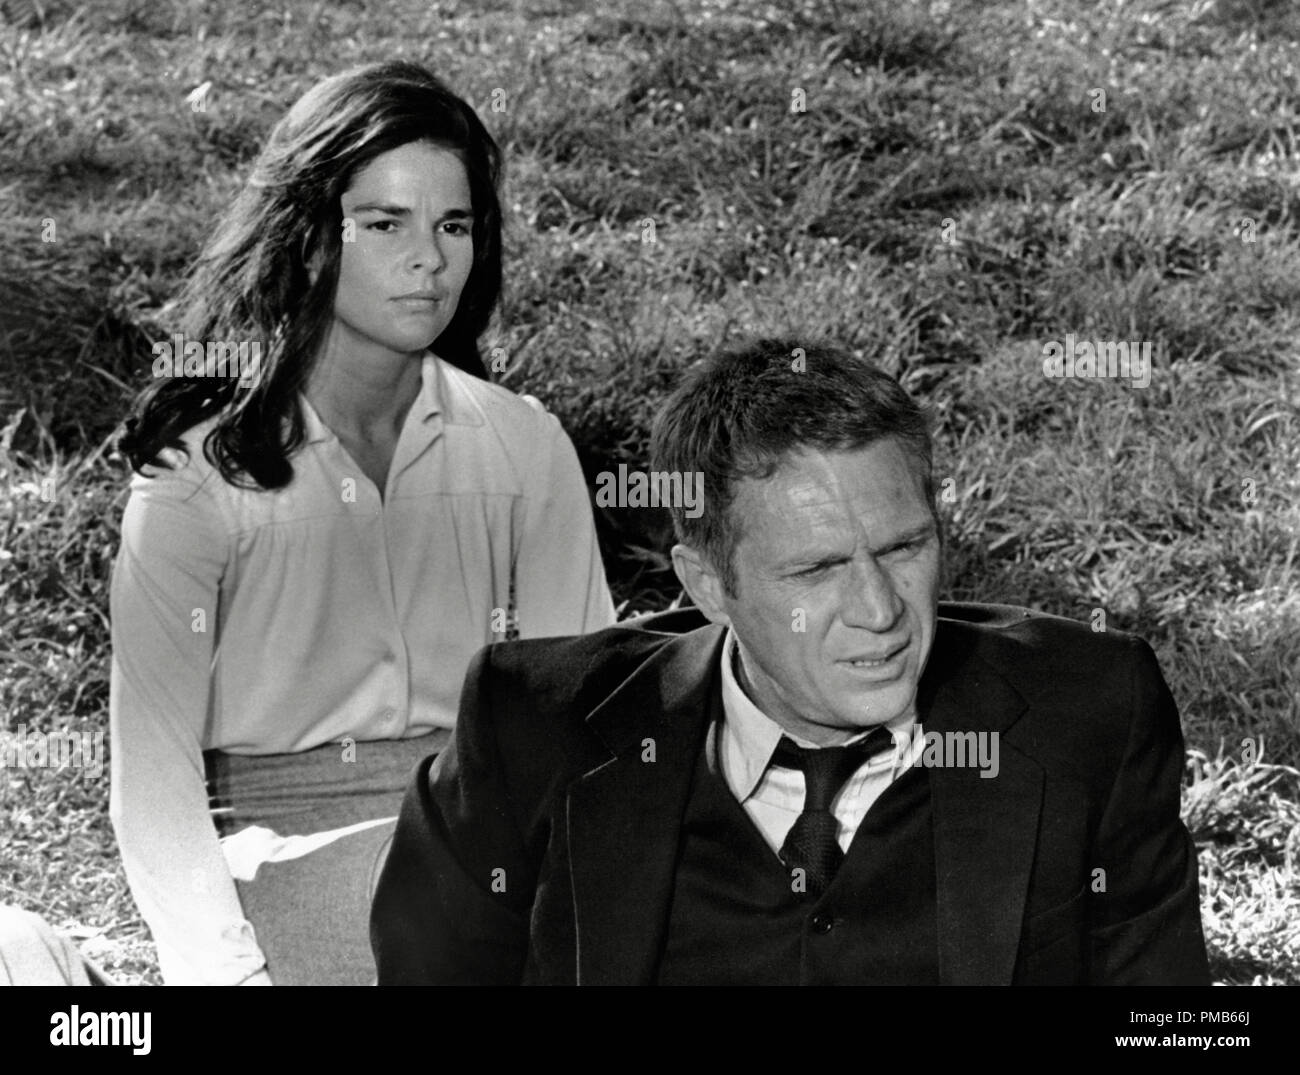 Ali Macgraw, Steve McQueen, "The Getaway" (1972) Warner Bros.  File Reference # 33536_830THA  For Editorial Use Only -  All Rights Reserved Stock Photo